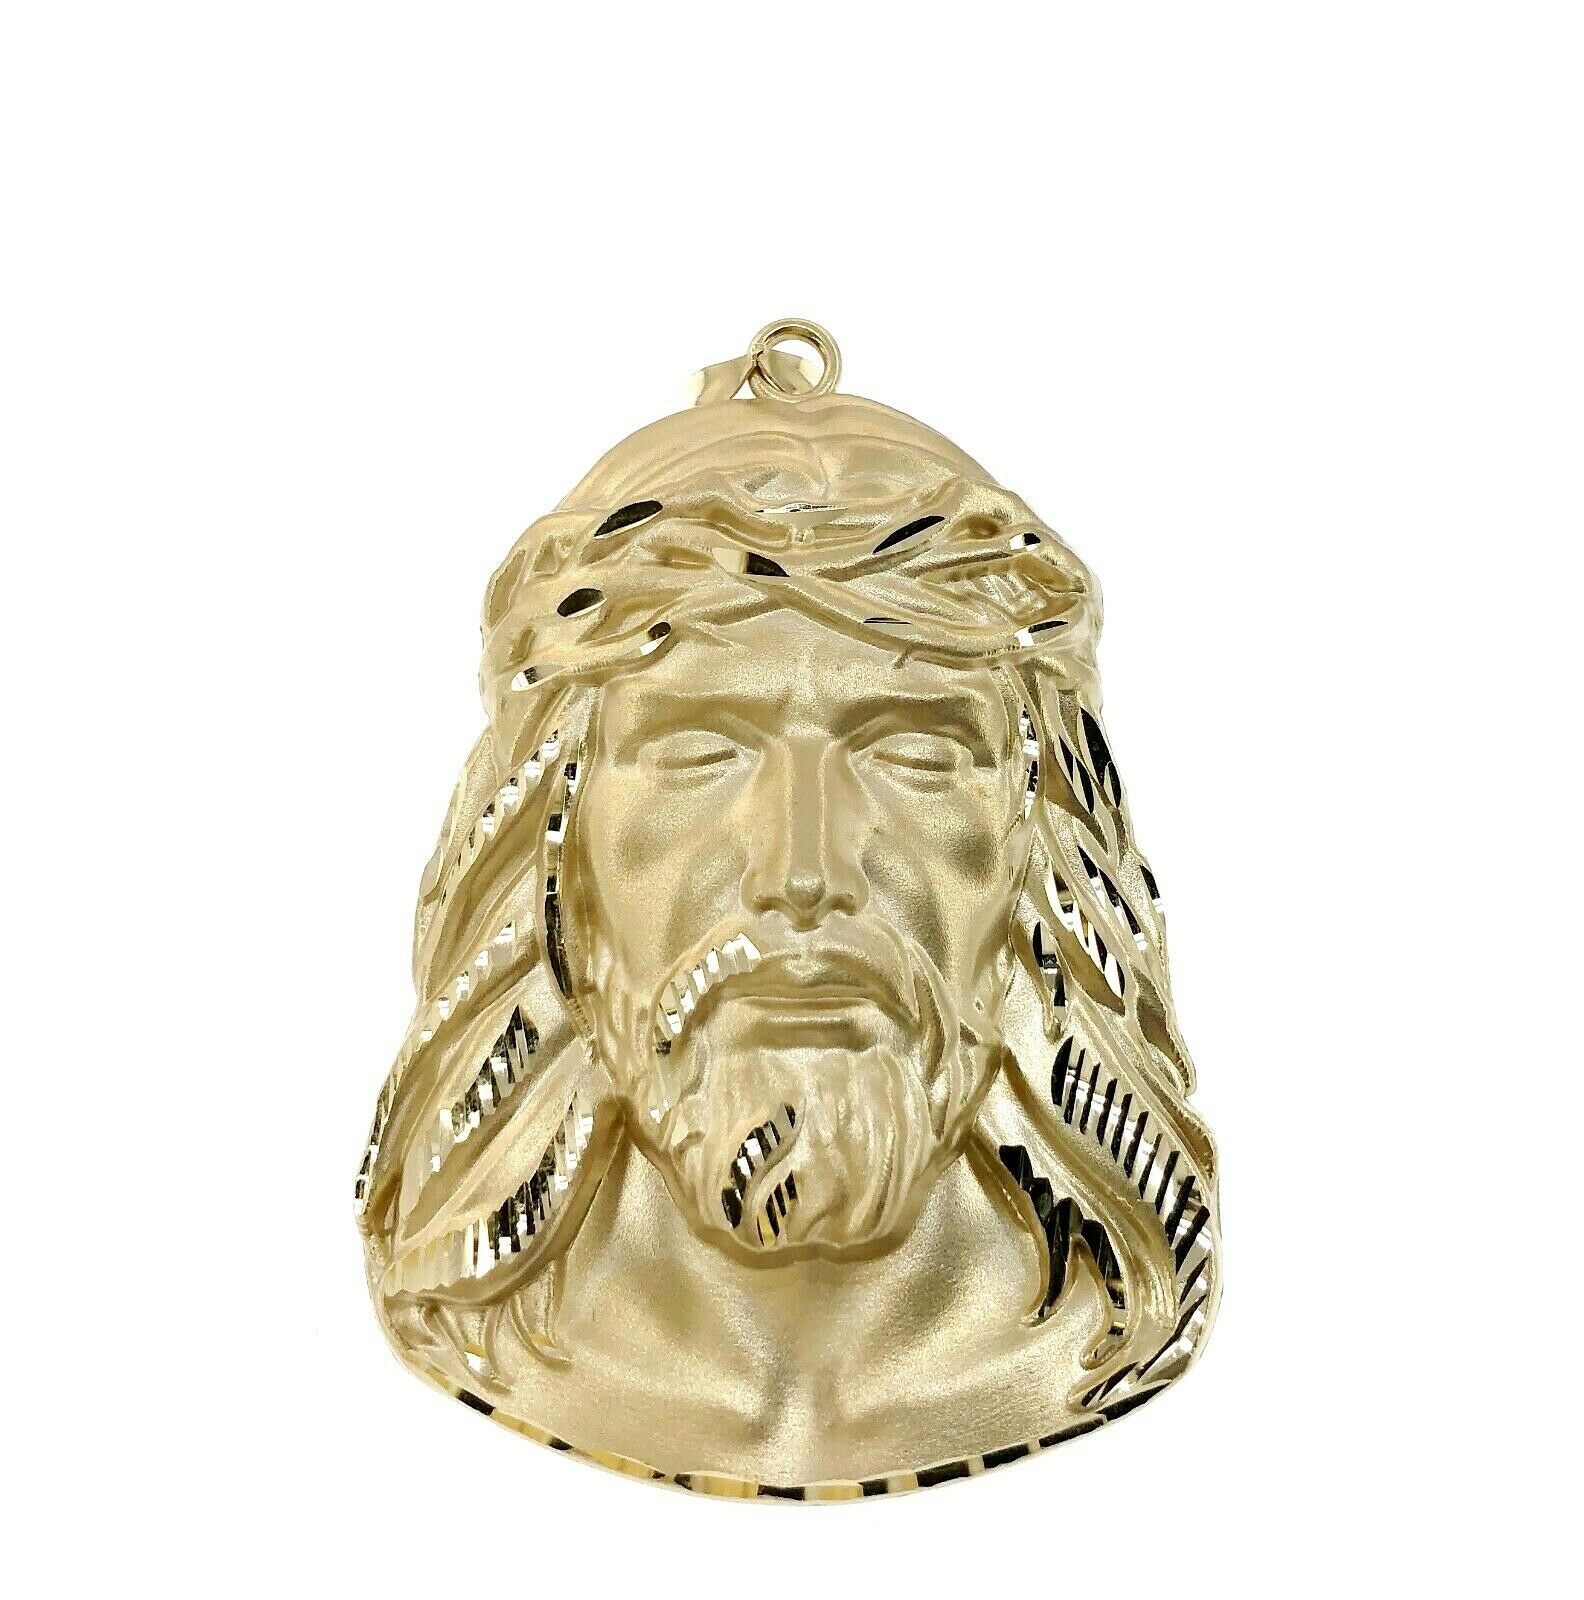 Custom Made Jesus Medallion Pendant Solid 14K Yellow Gold 3.30 x 2.00 Inches